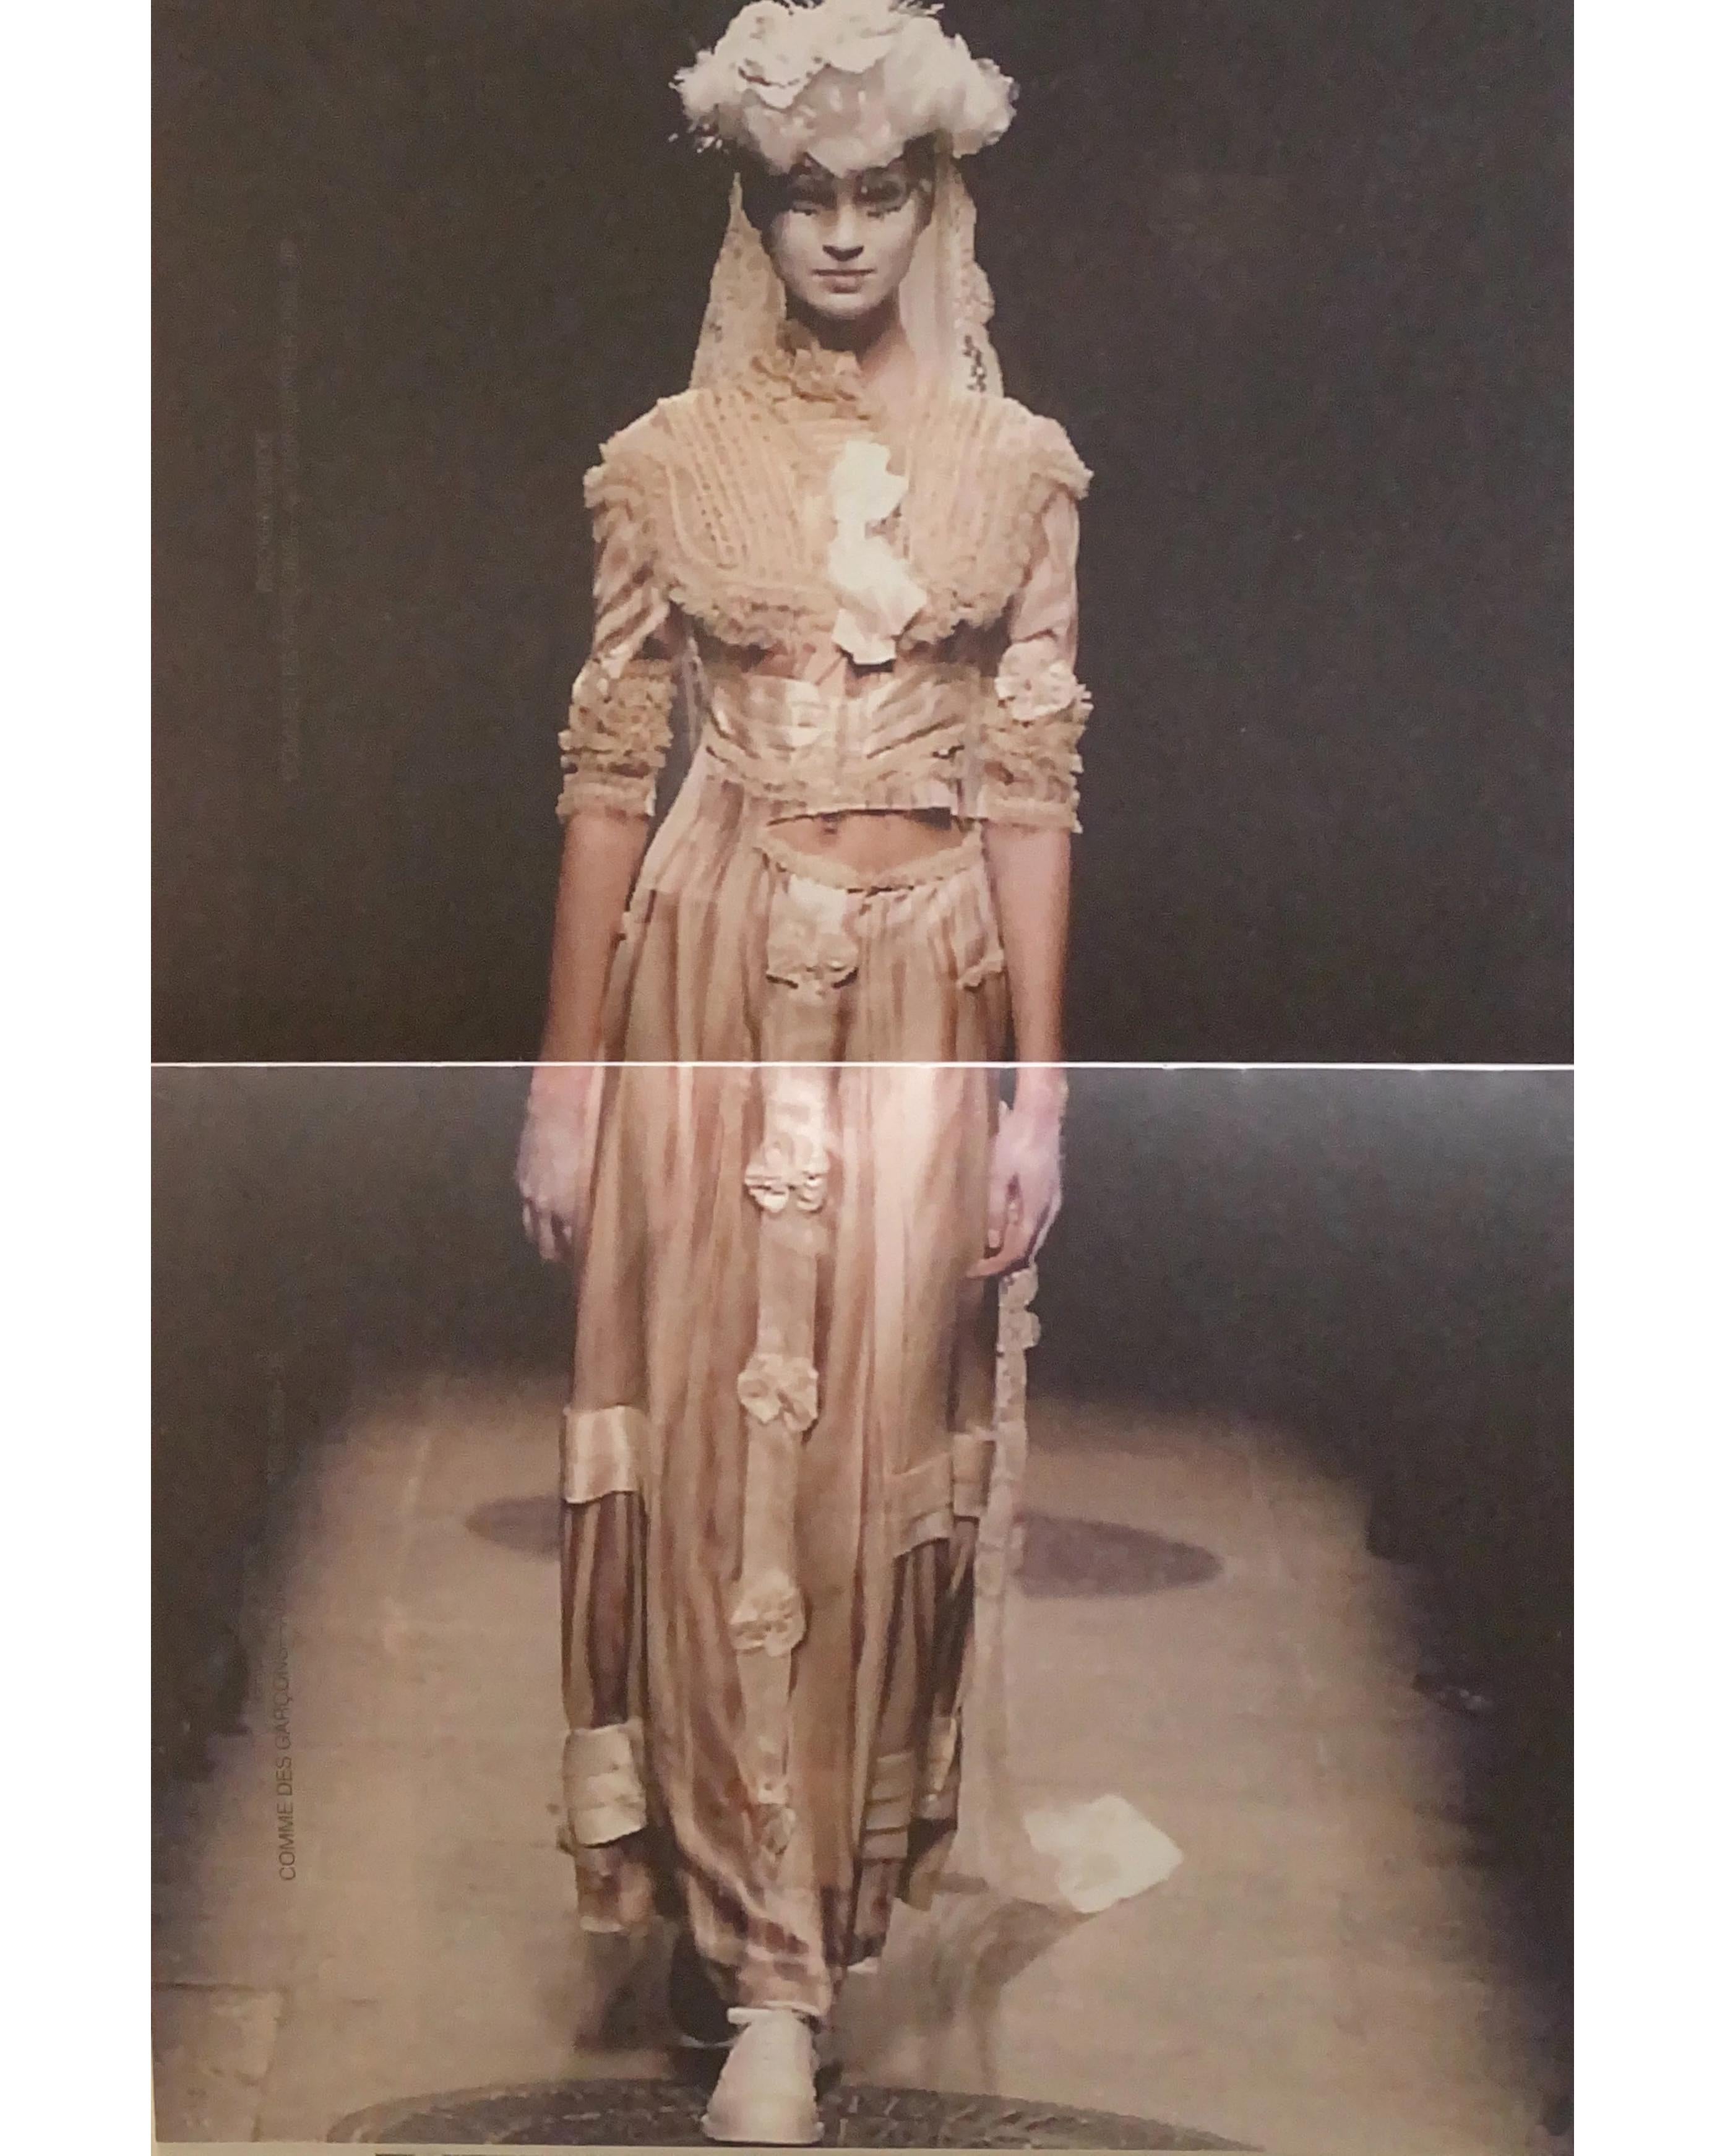 A/W 2005 Comme des Garcons by Rei Kawakubo 'Broken Bride' Collection deconstructed tan gown. Features trompe l'oeil pleating and hem pattern effect throughout. Contrasting neutrals with light cream, tan and brown ruffles and bows at front, back and